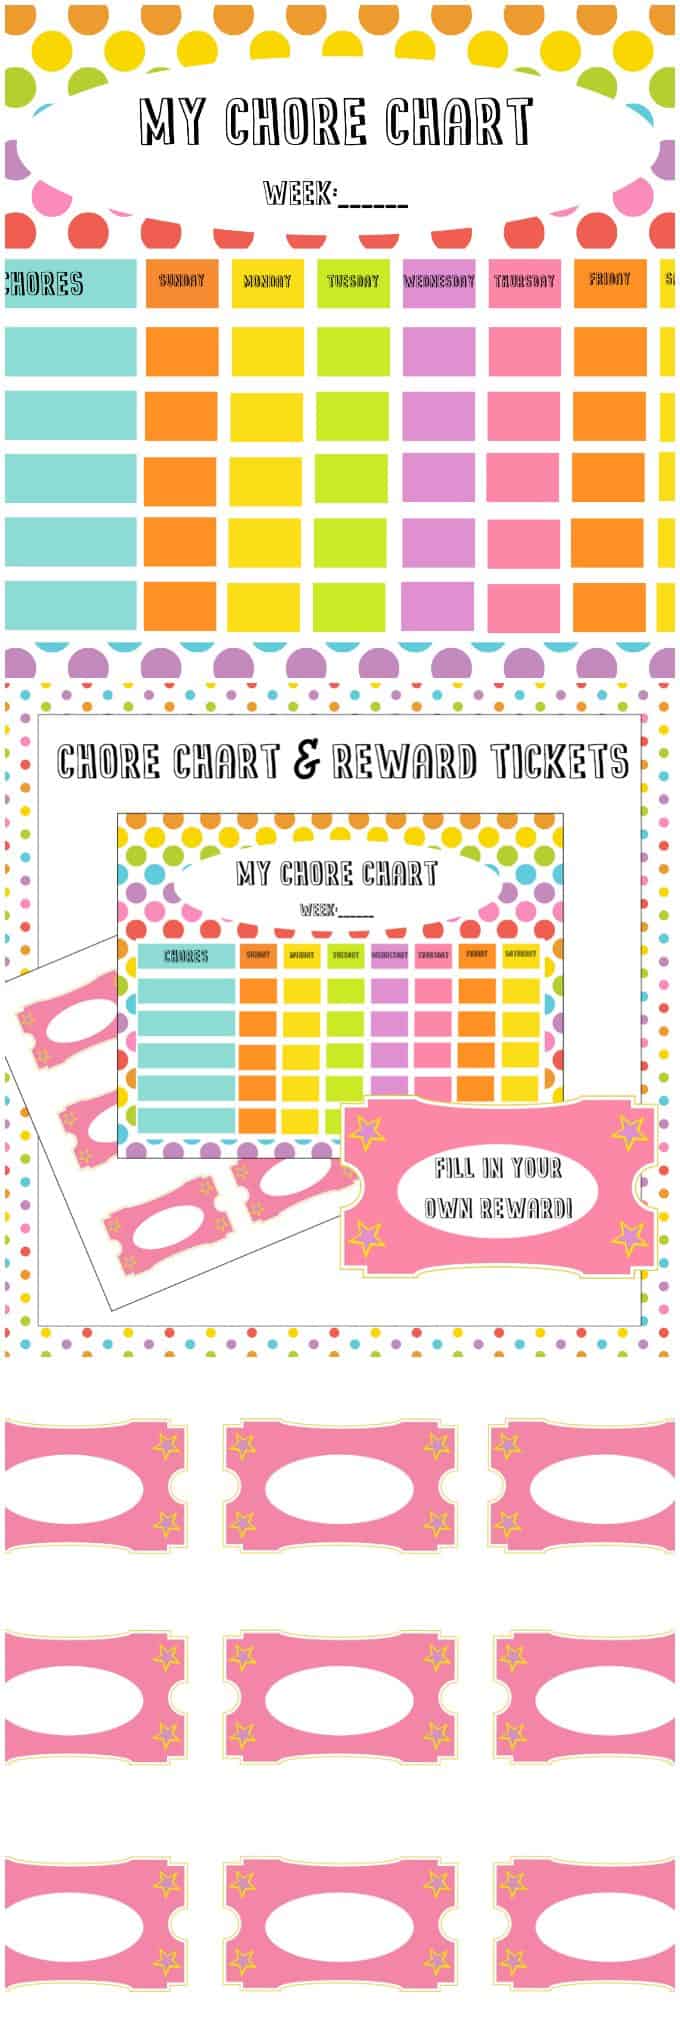 Free Chore Chart & Reward Tickets Printable - Motivate and organize your kids to earn their keep around the house!